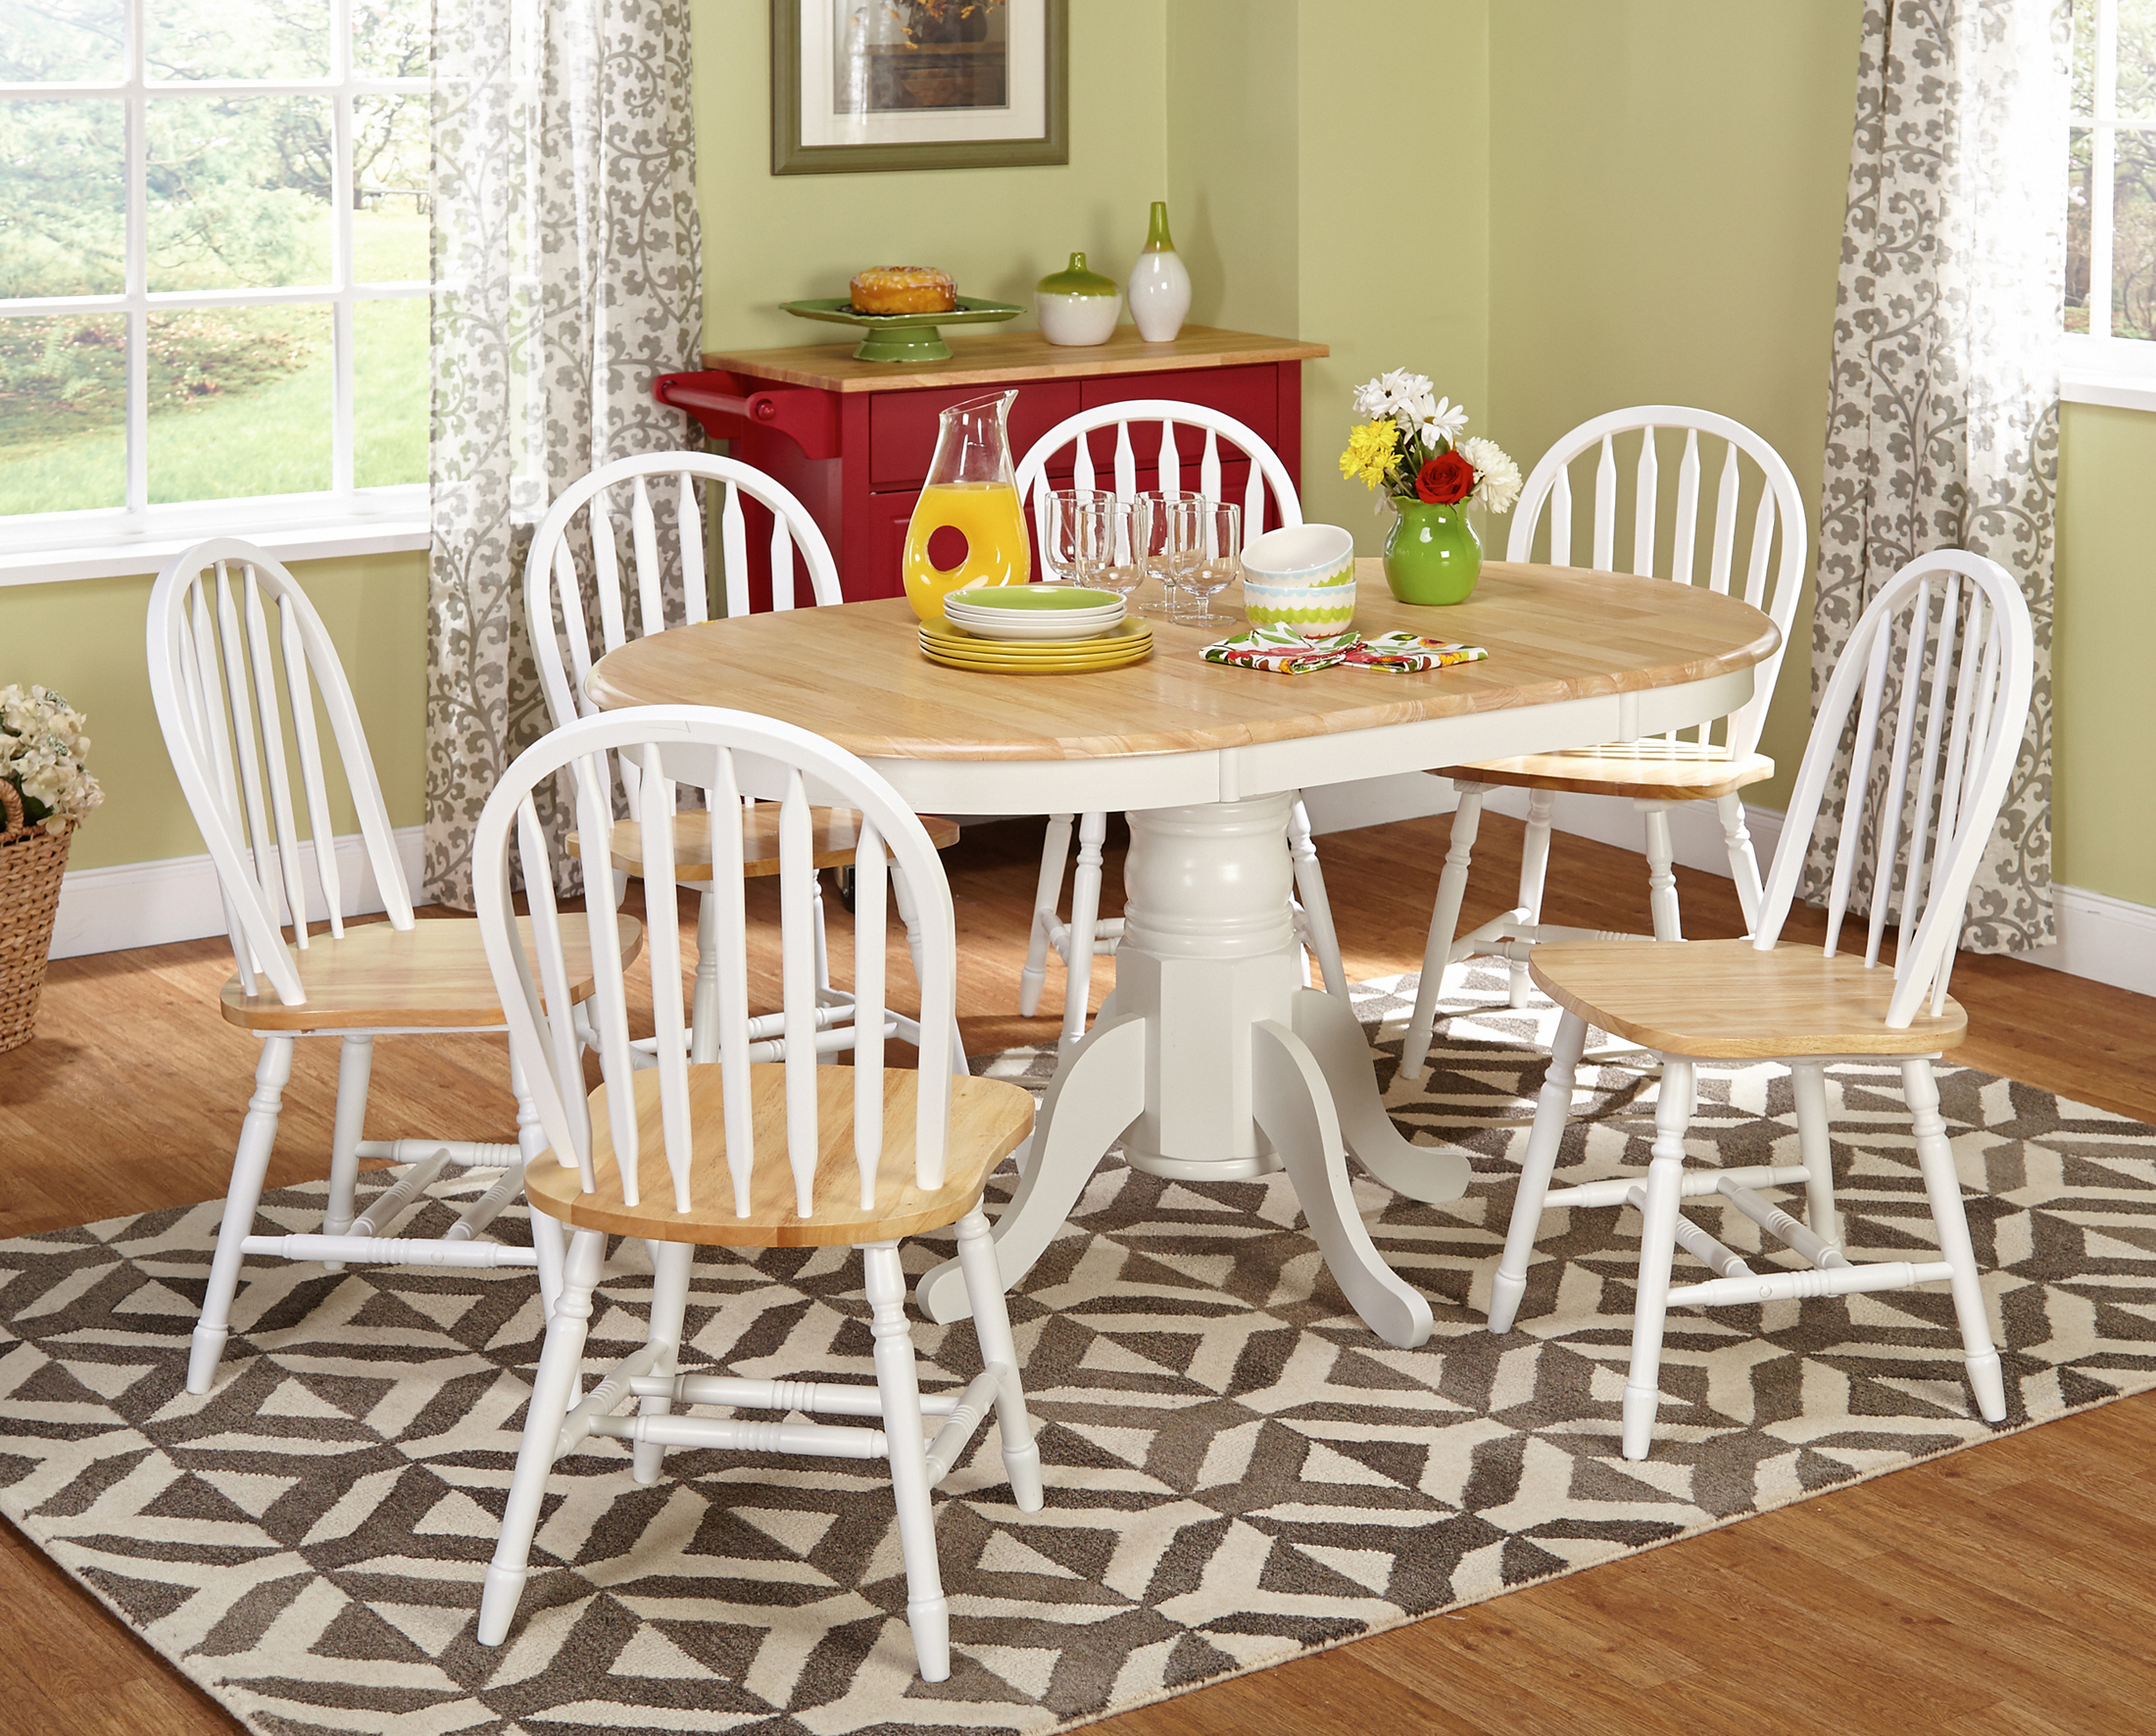 7 pc. Farmhouse Dining Set in White/Natural